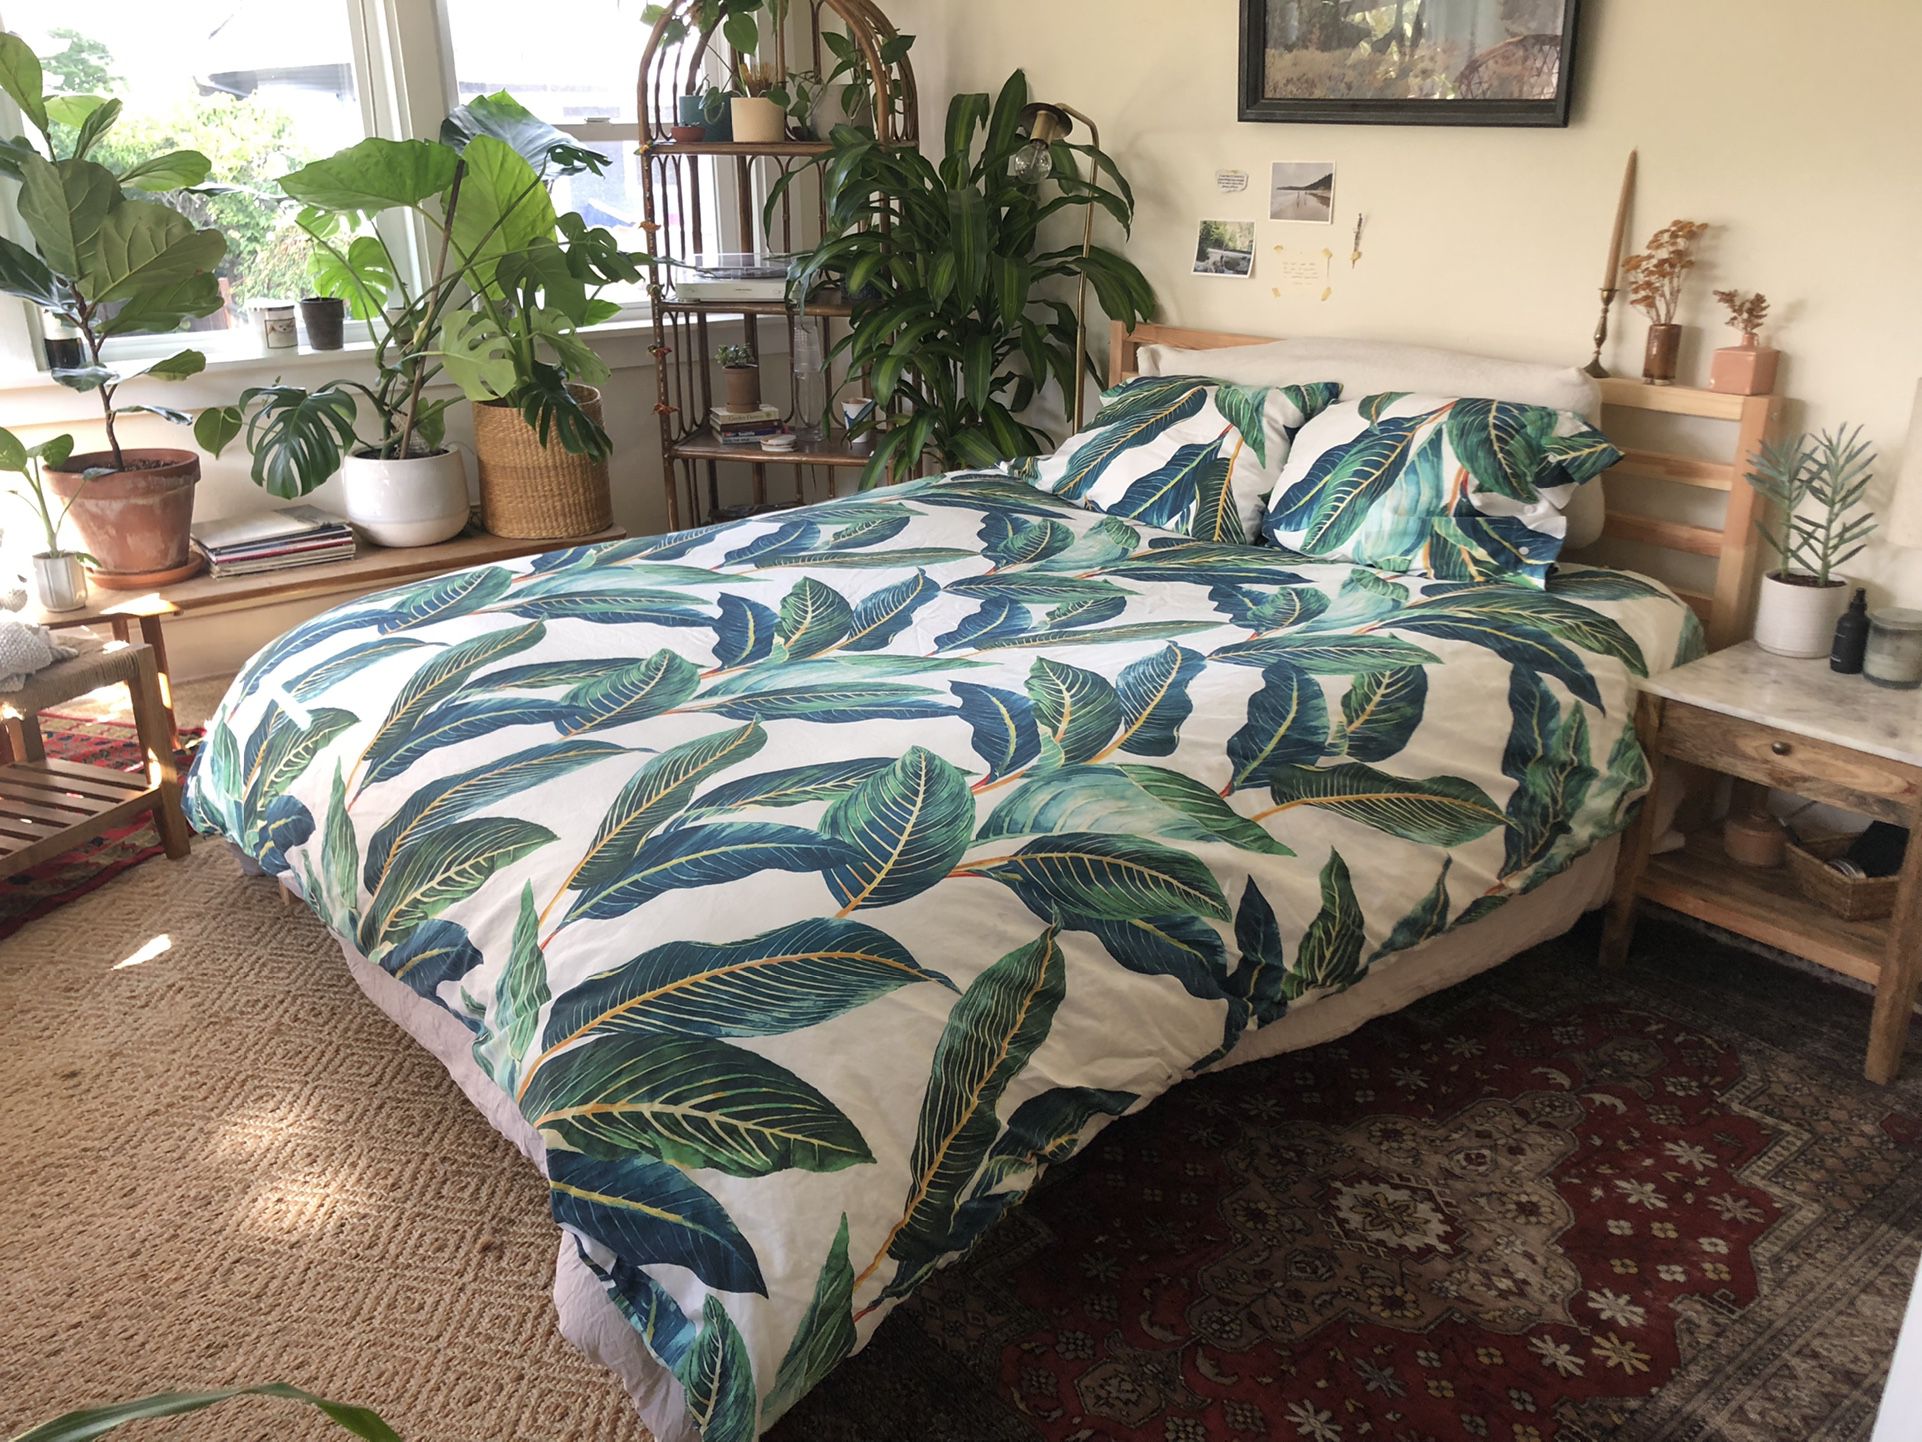 Jungle Boho Bedspread, Down Comforter, And Body Pillow